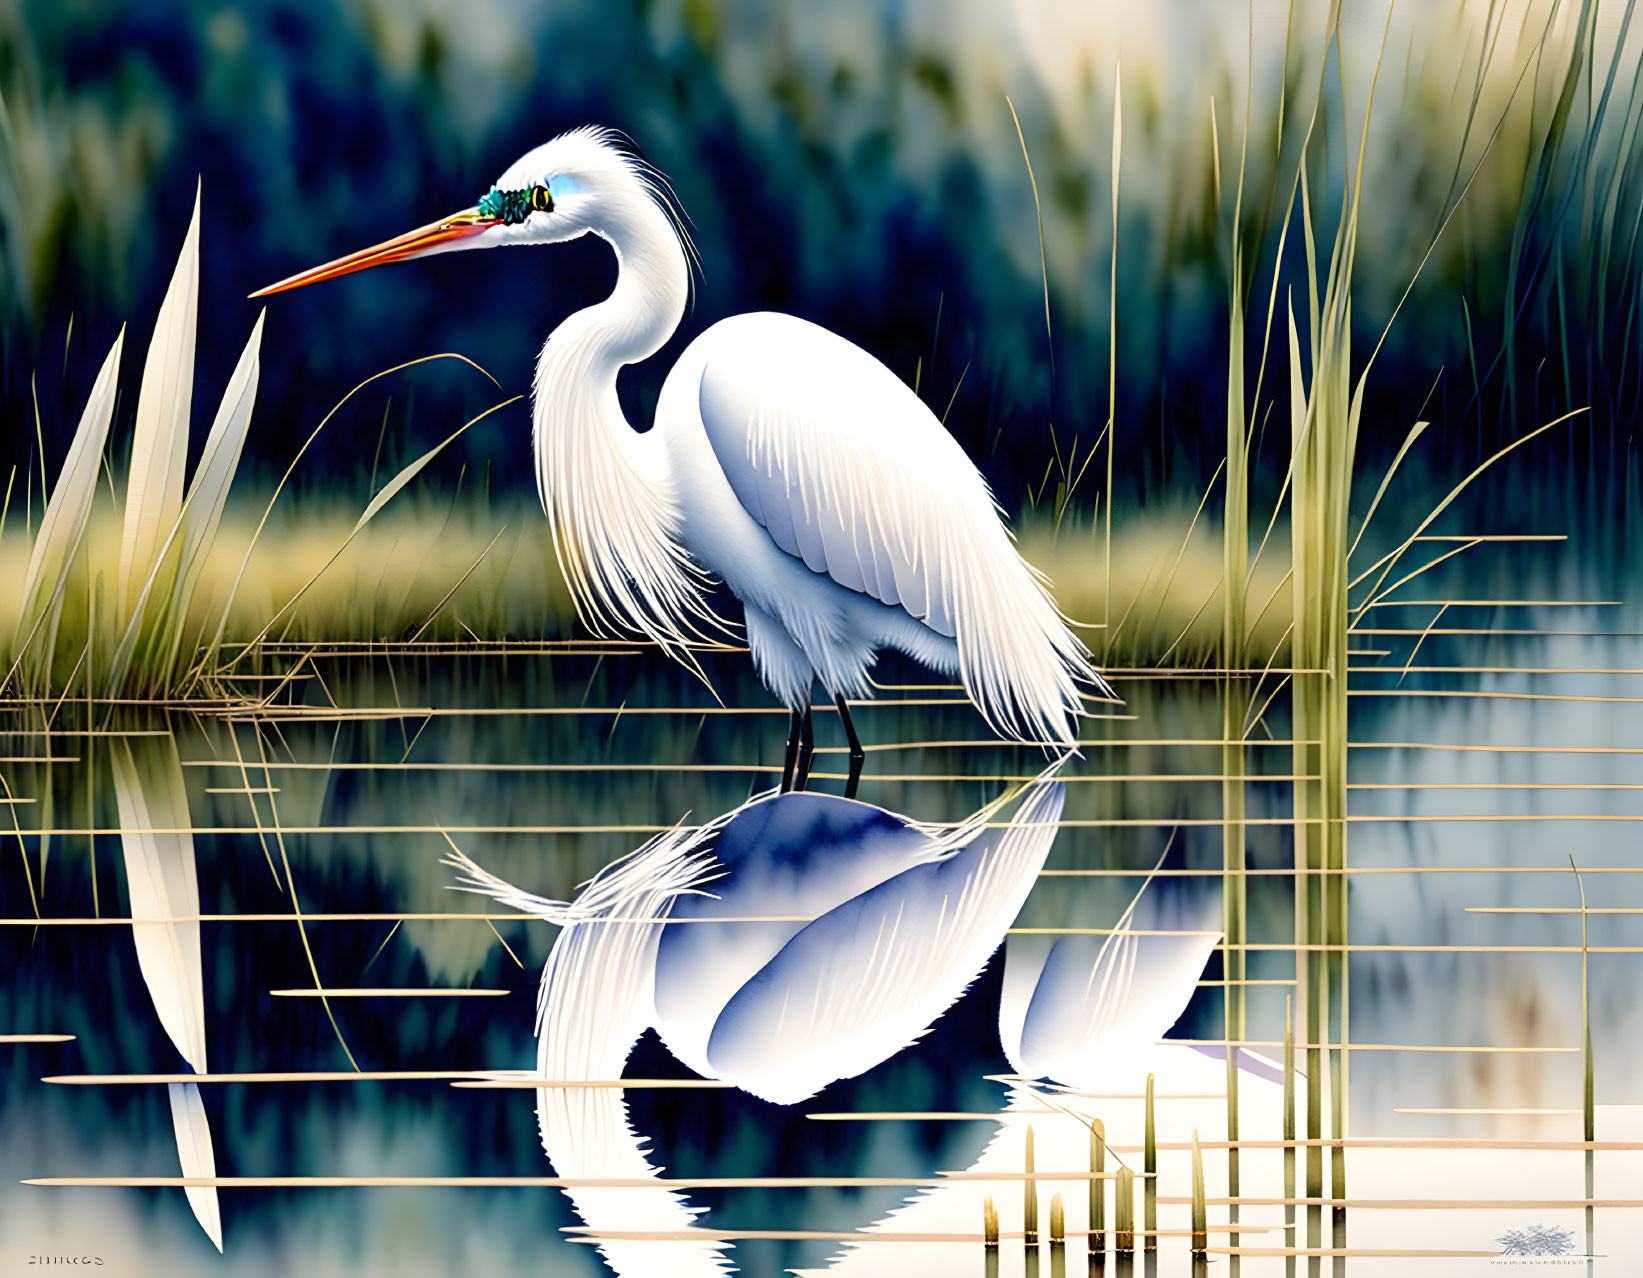 White egret in serene wetland with detailed plumage and reflection